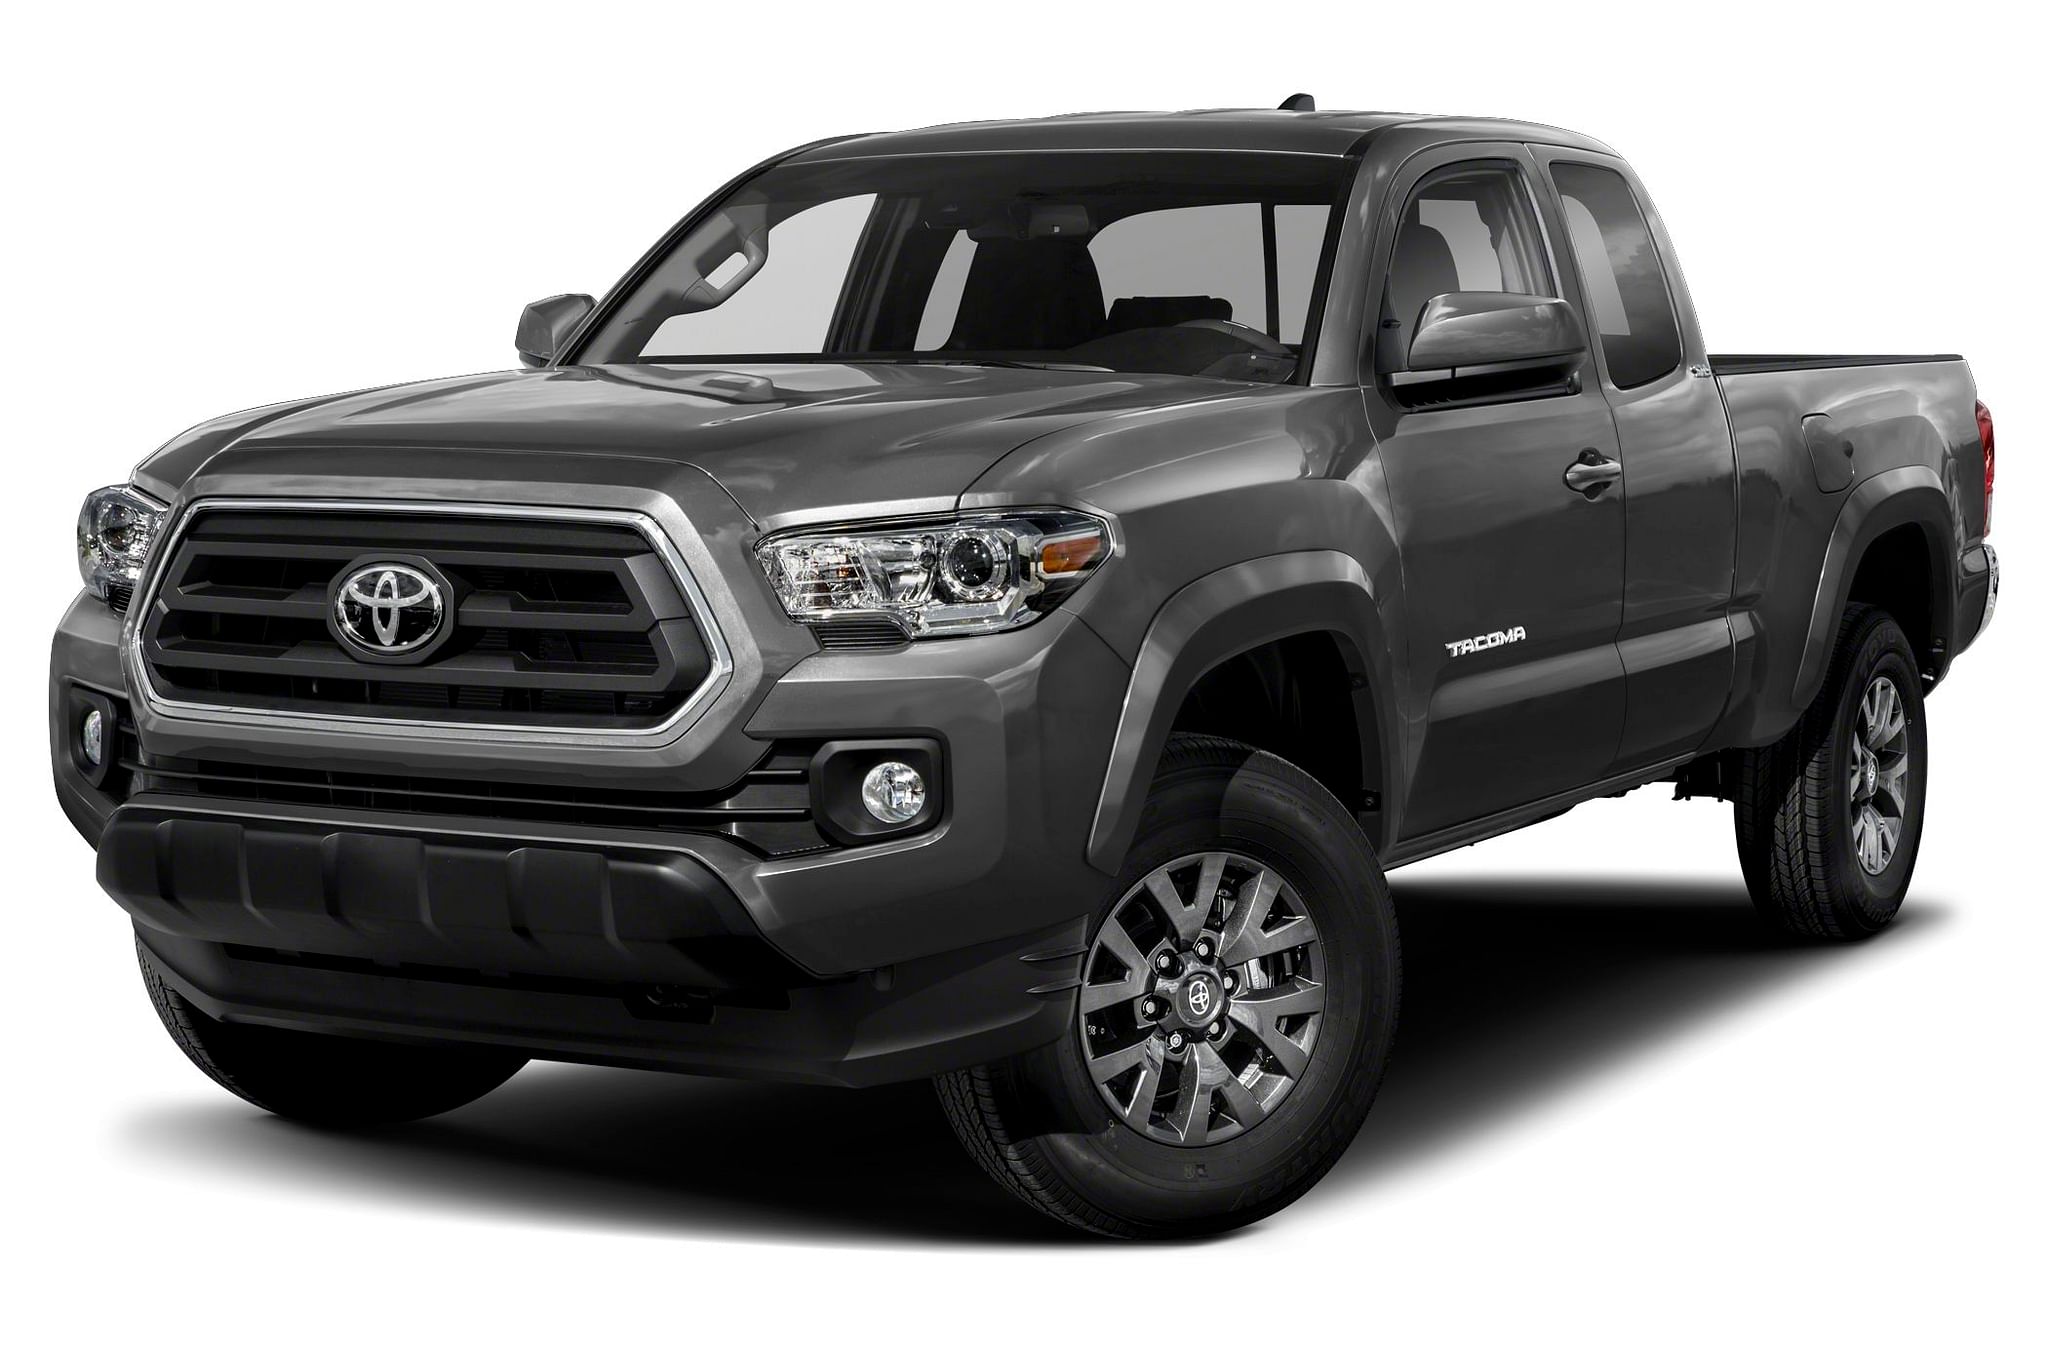 2022 Toyota Tacoma TRD Sport Access Cab Pricing, Review, Pictures and